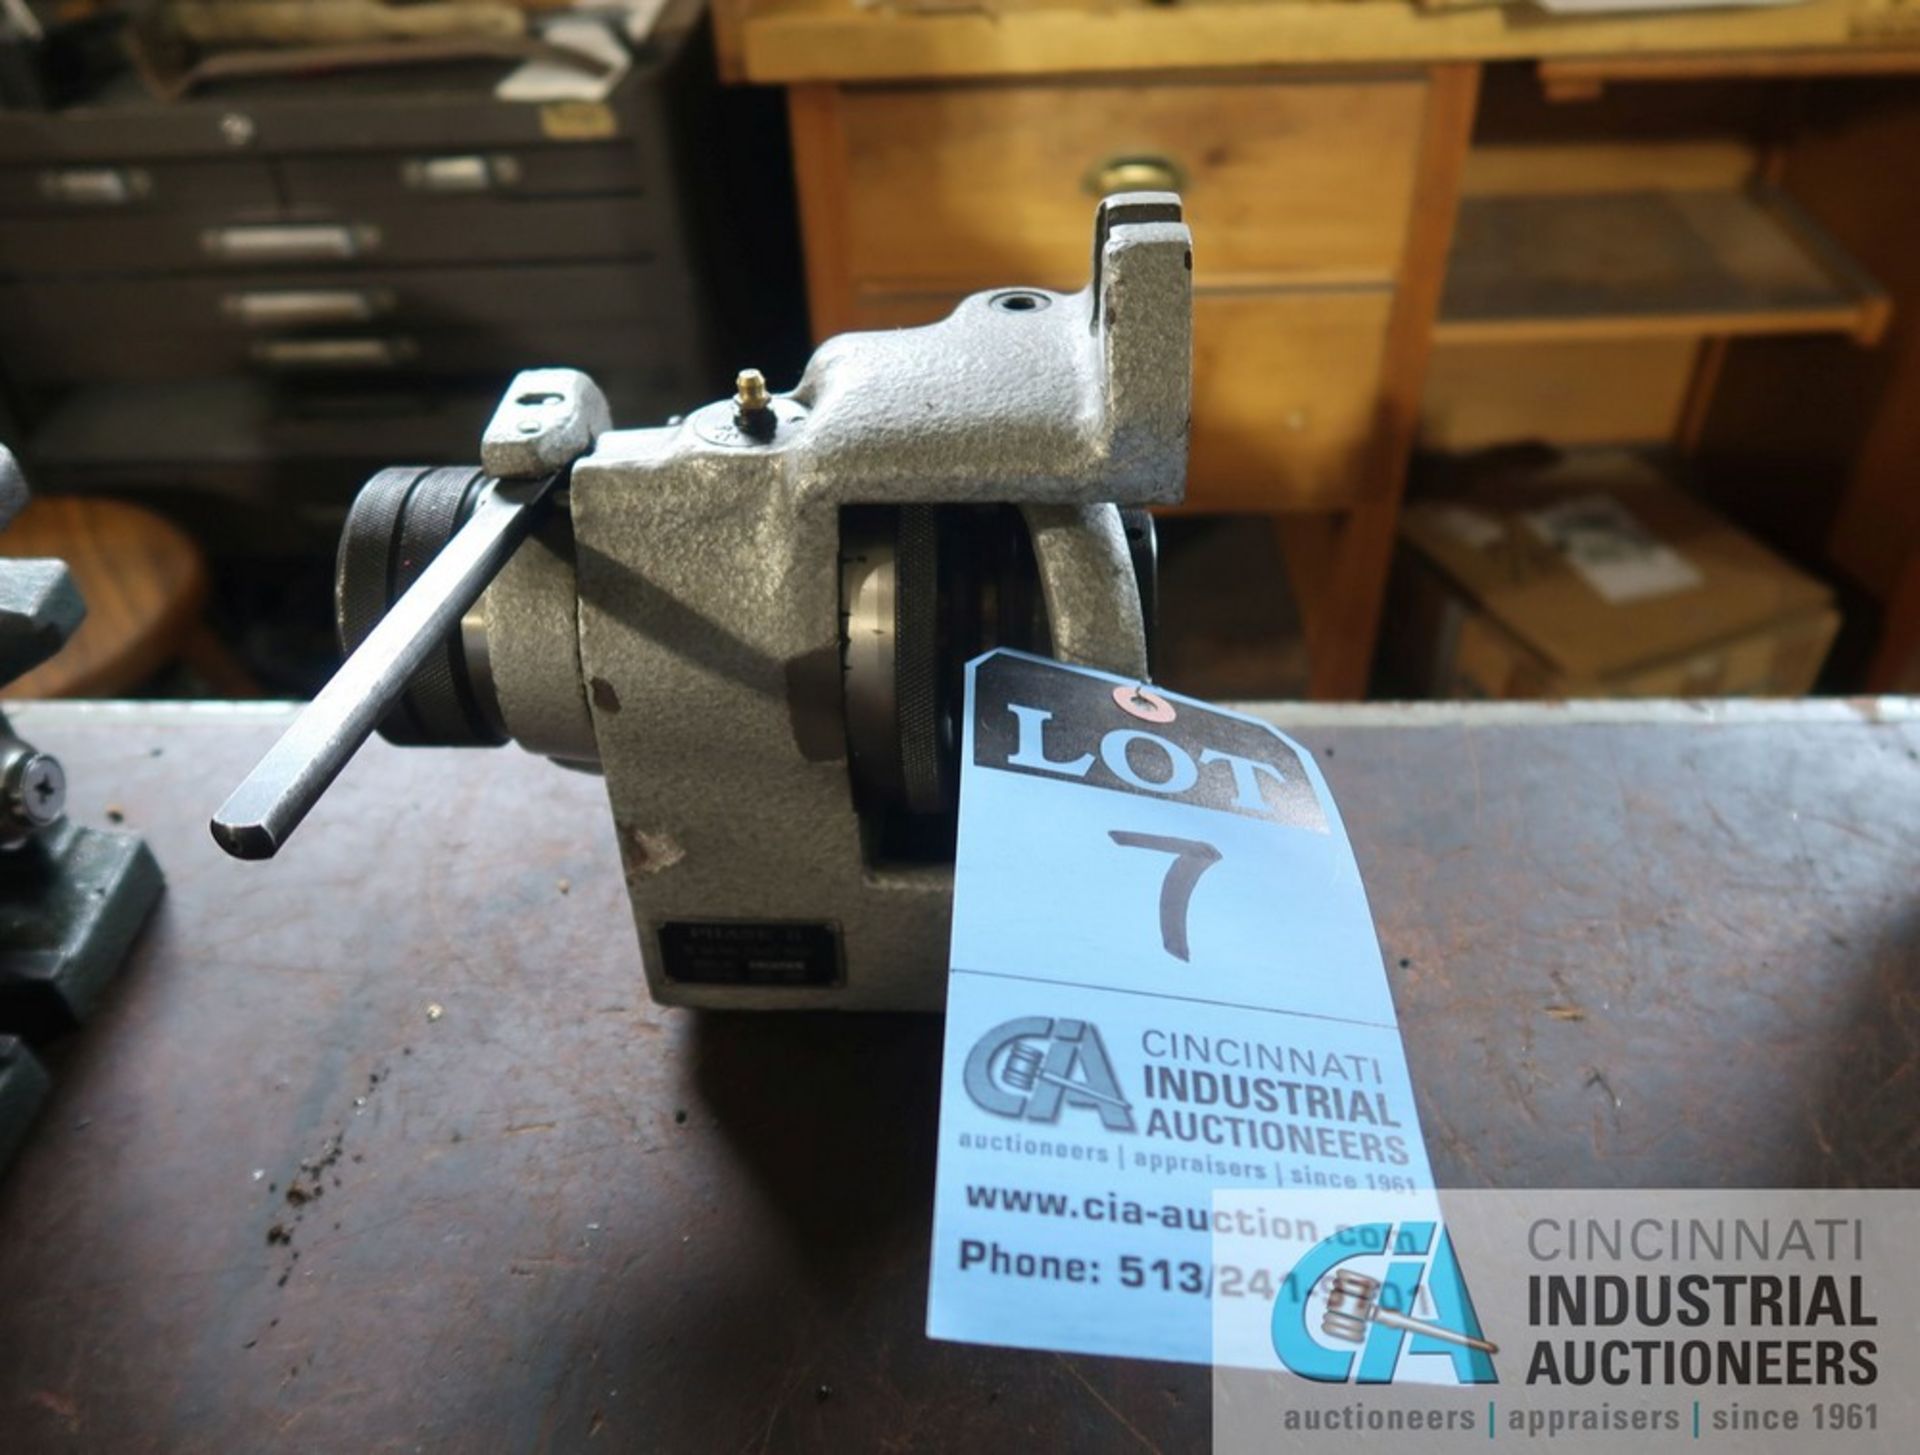 5C PHASE II STOCK NO. 225-205 COLLET INDEXER